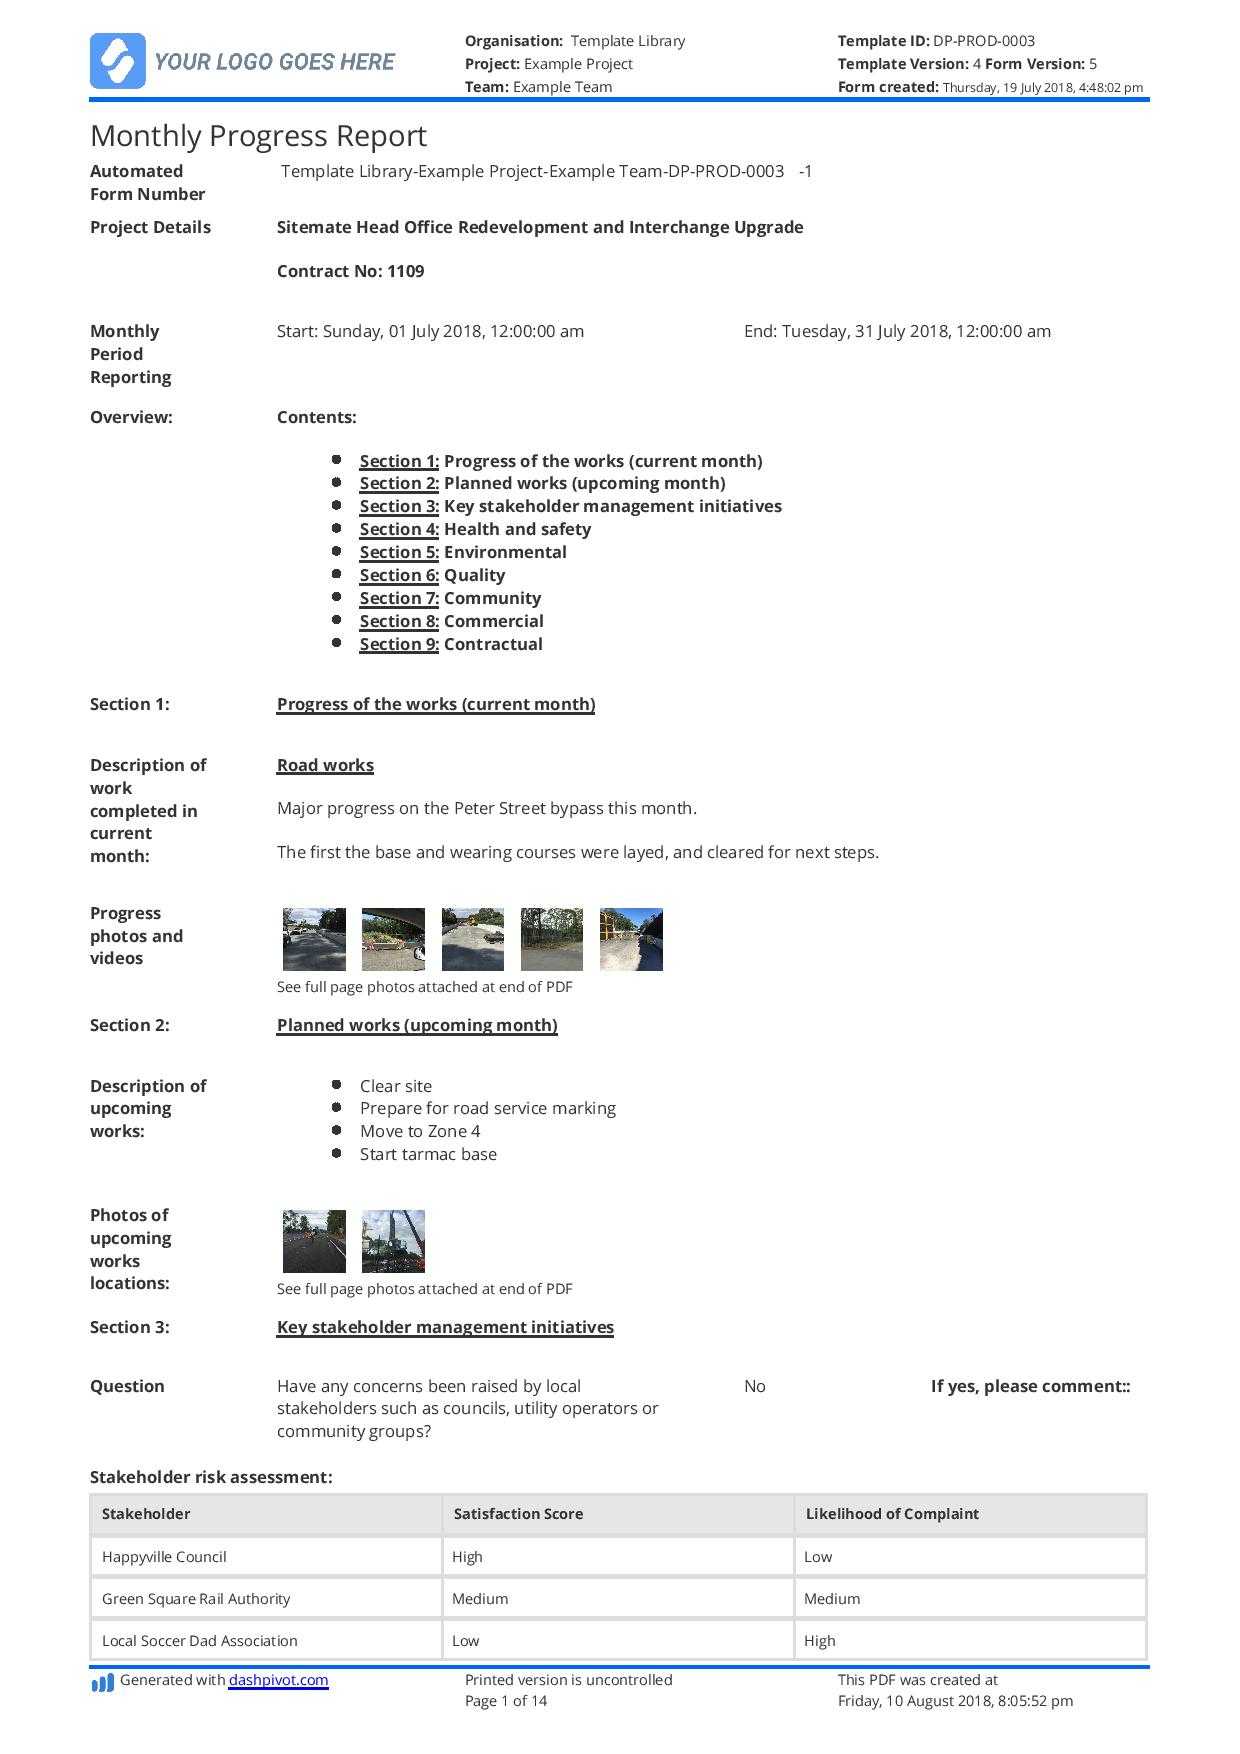 Monthly Construction Progress Report Template: Use This Intended For Construction Daily Progress Report Template